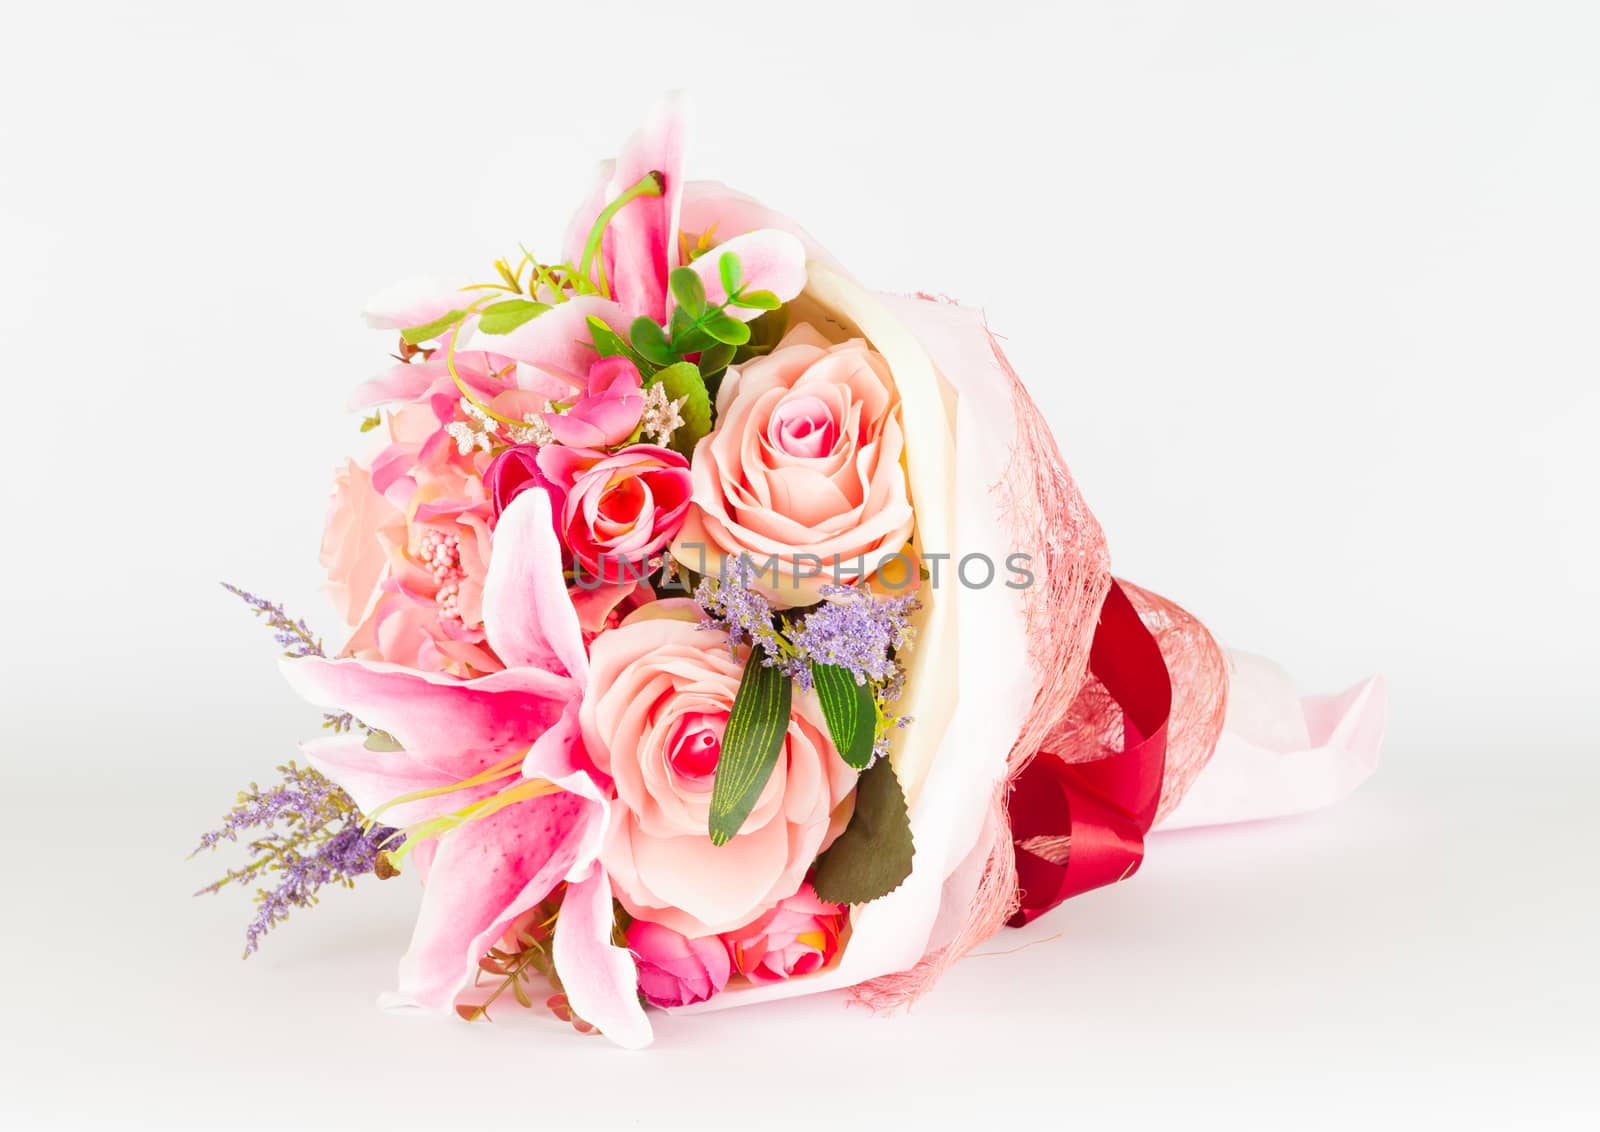 Plastic Rose Bouquet by noneam